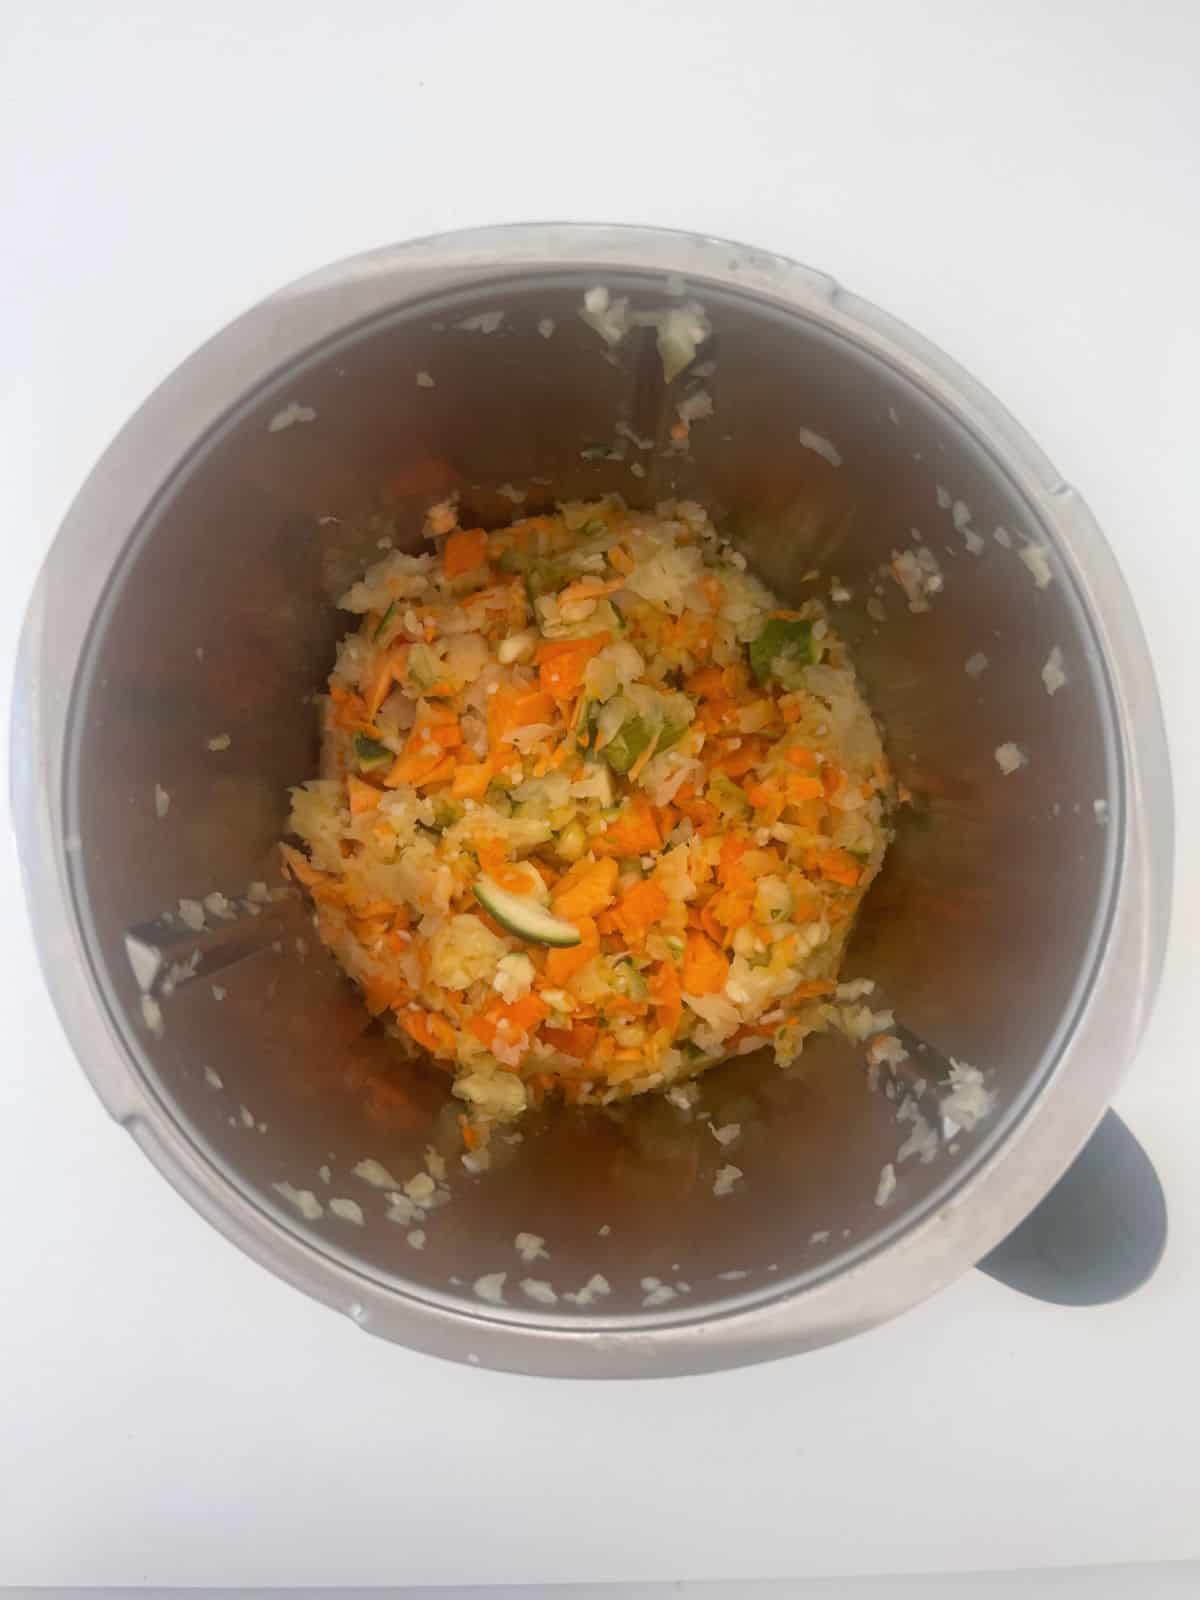 Diced vegetables in a Thermomix bowl that have been cooked.